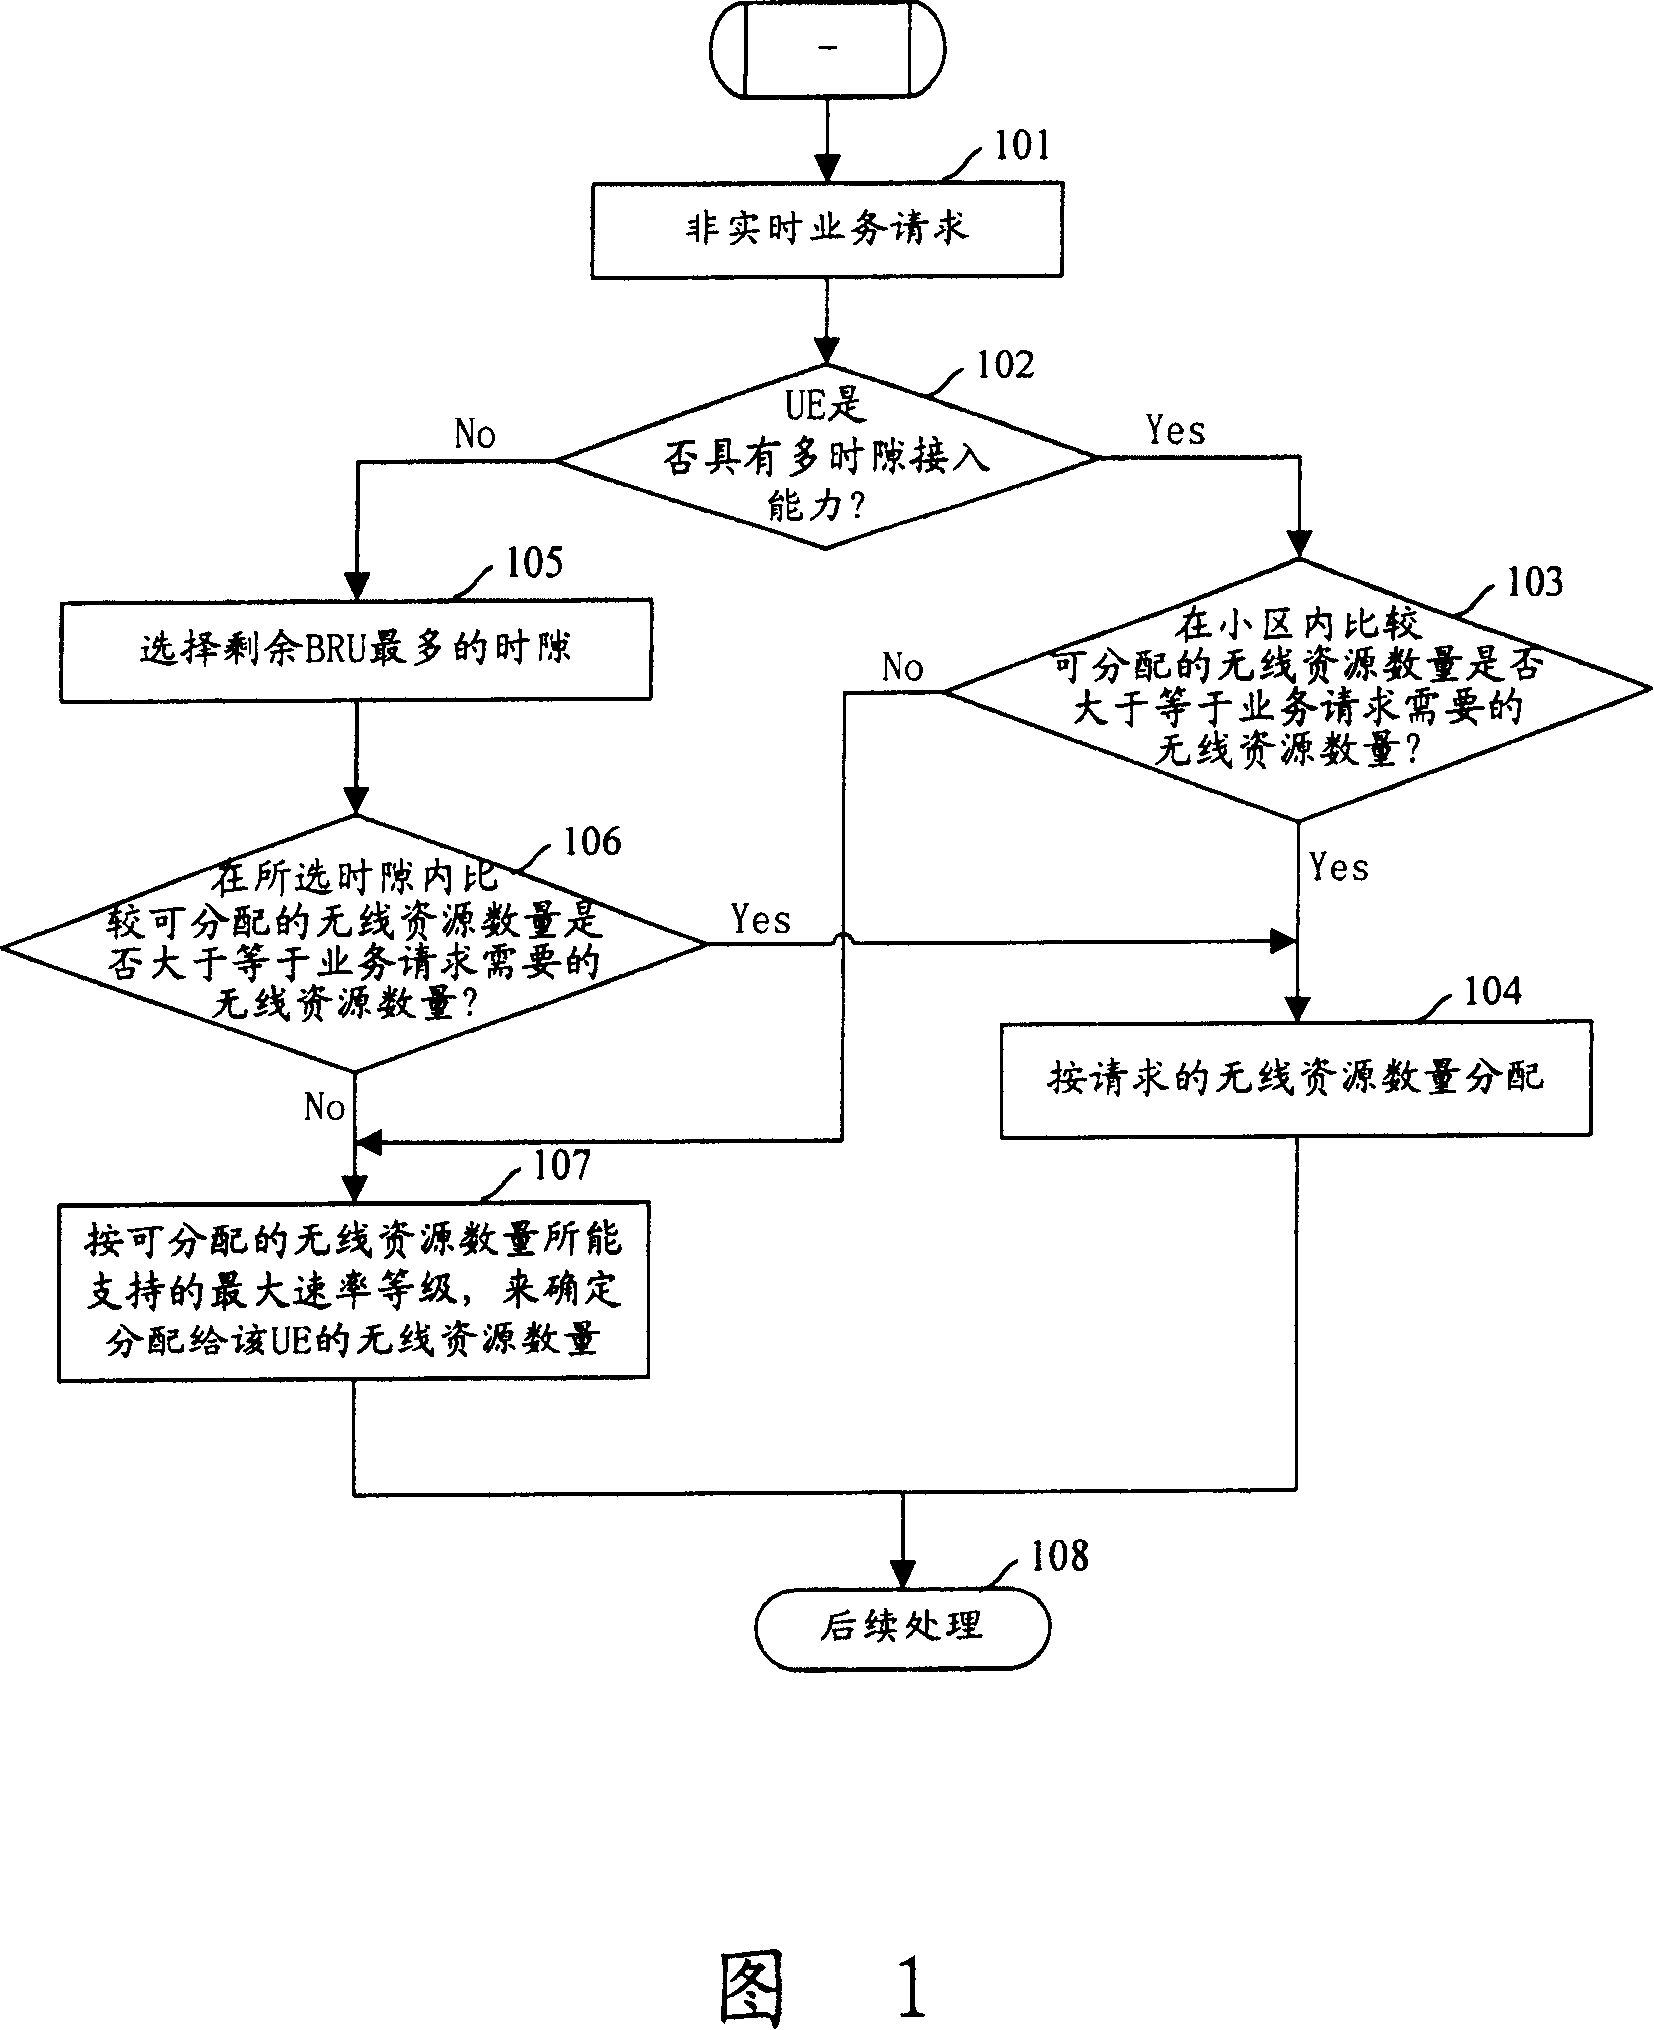 Method for controlling non-realtime service data transmission of mobile terminal